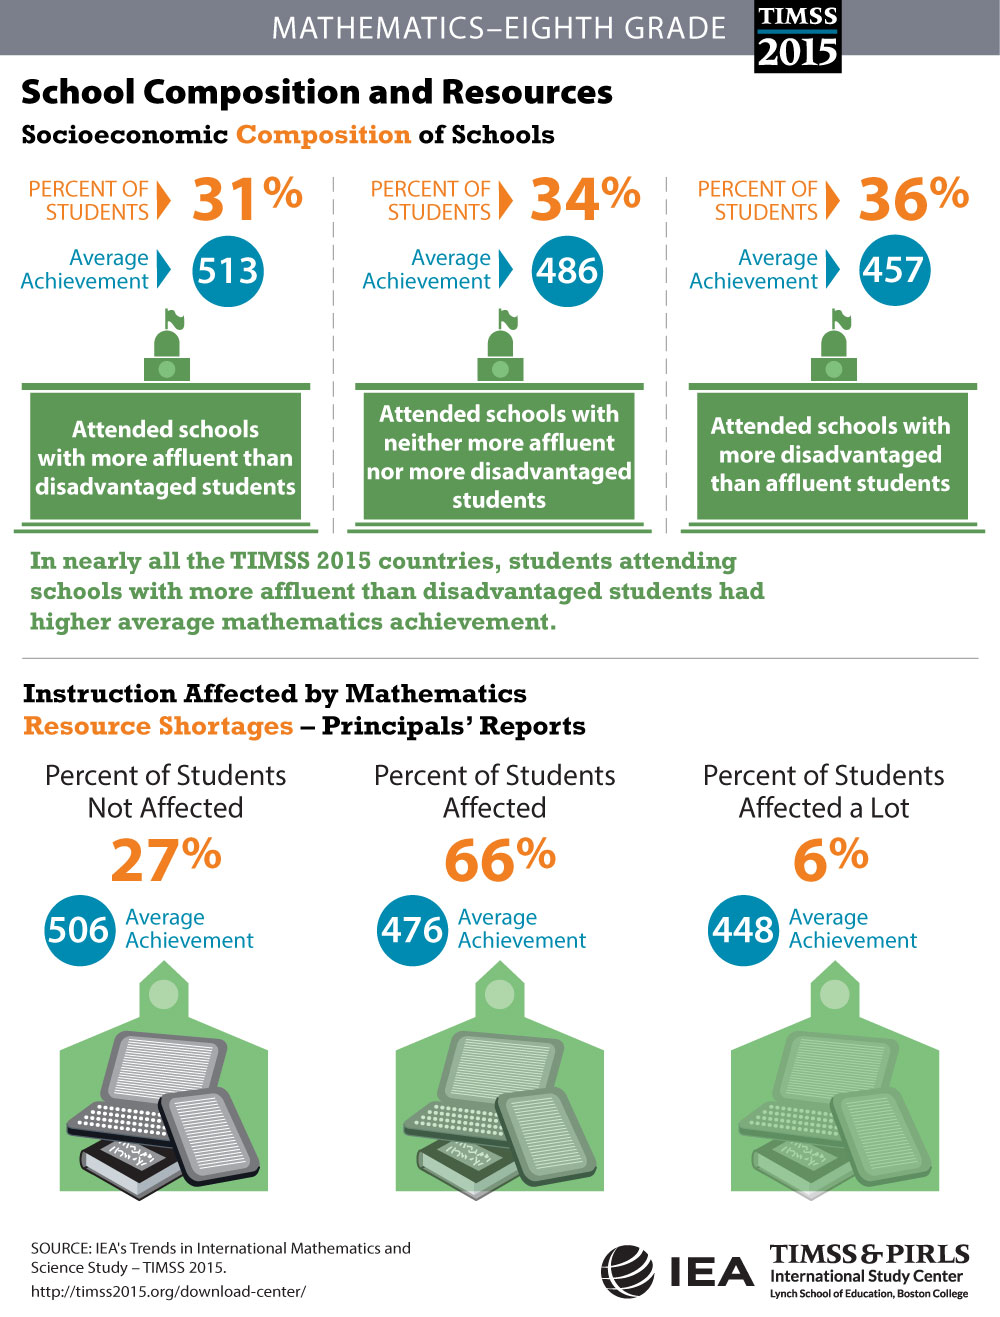 School Composition and Resources (G8) Infographic